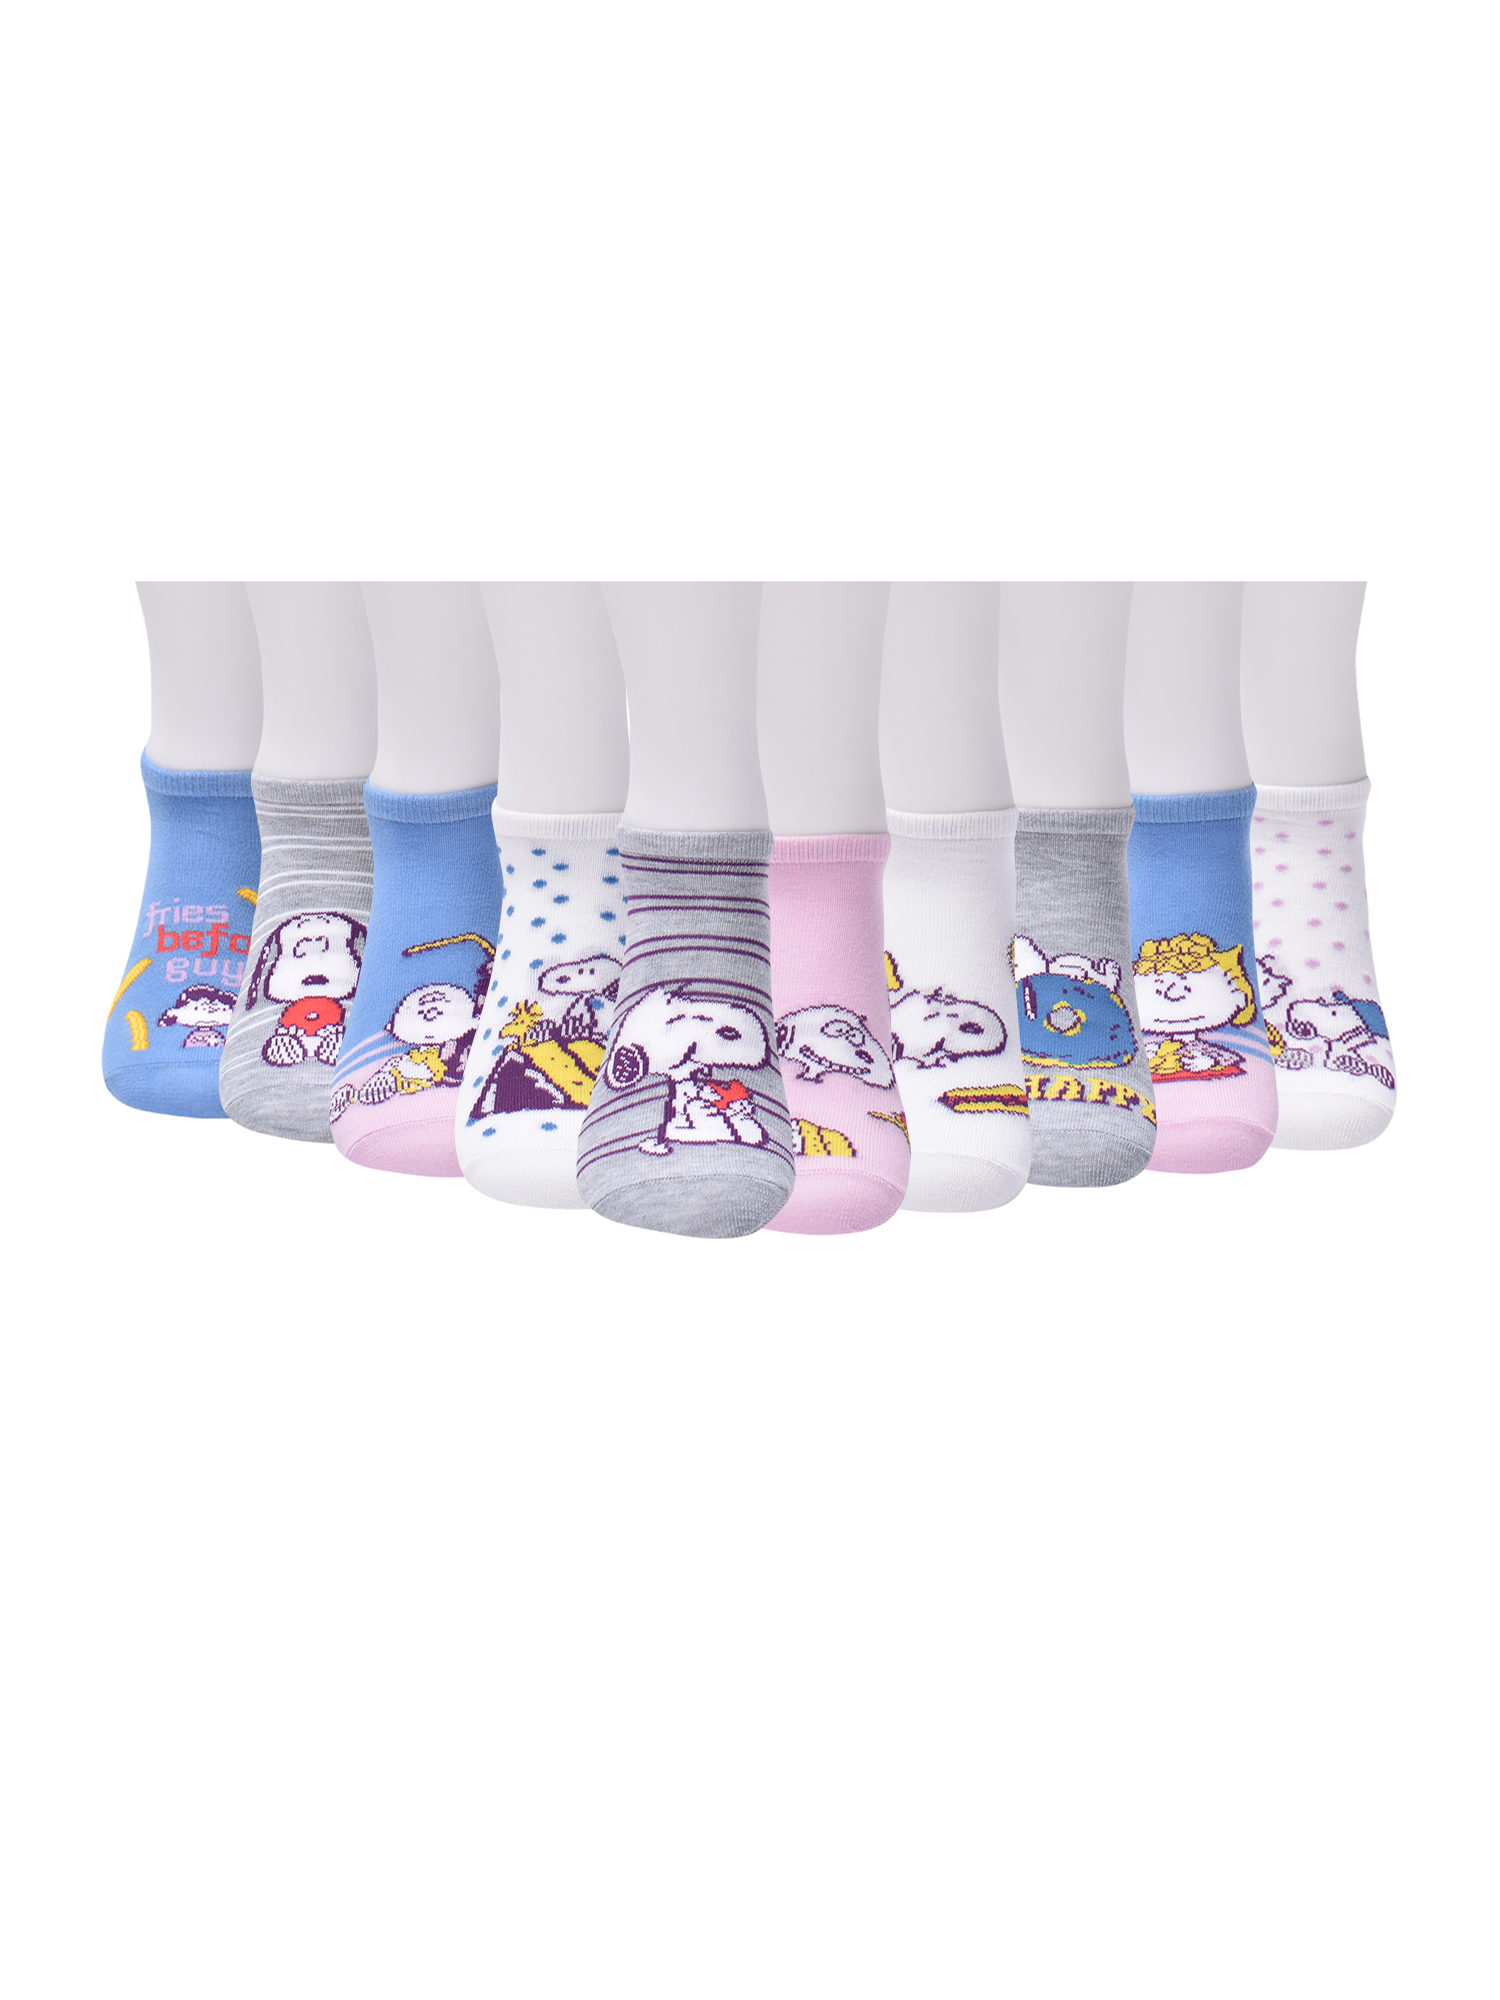 Peanuts Womens Graphic Super No Show Socks, 10-Pack, Sizes 4-10 - image 4 of 5